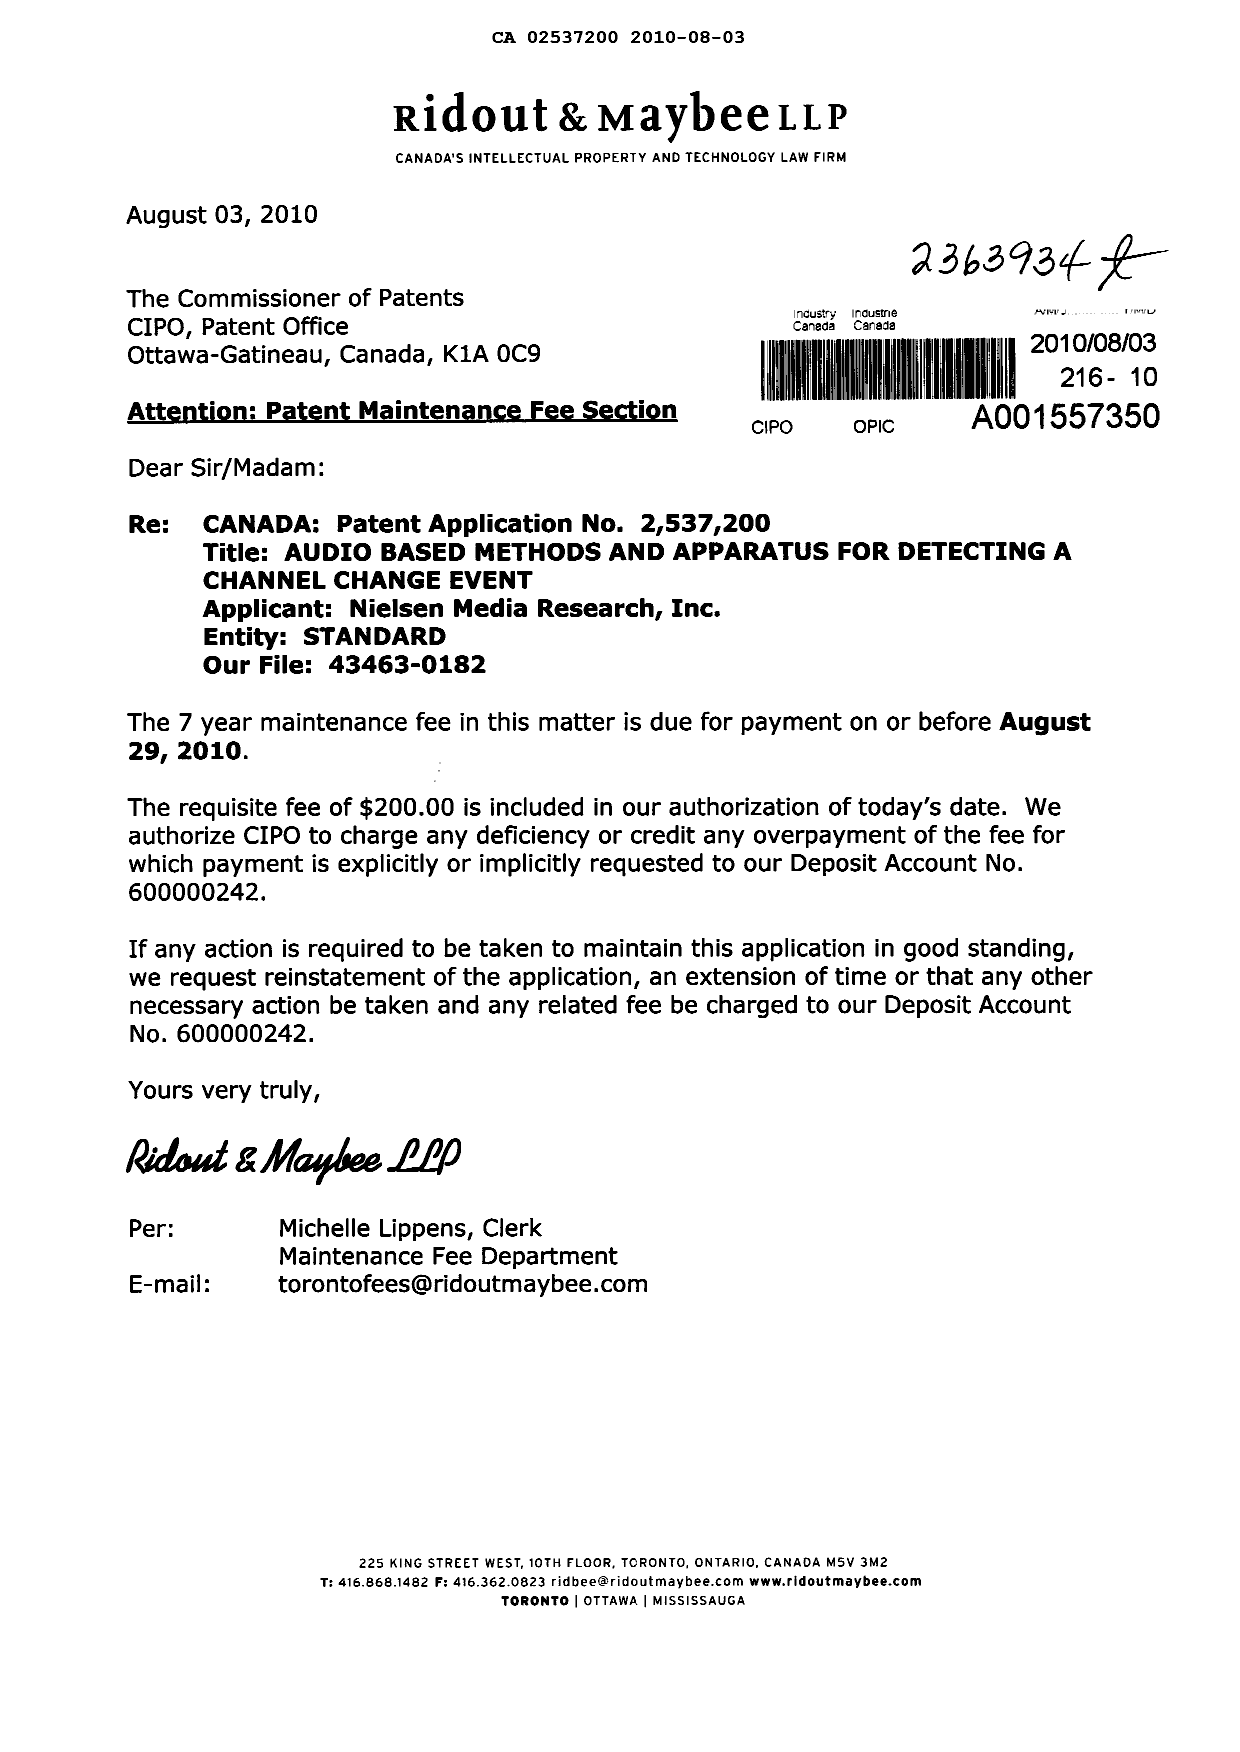 Canadian Patent Document 2537200. Fees 20100803. Image 1 of 1